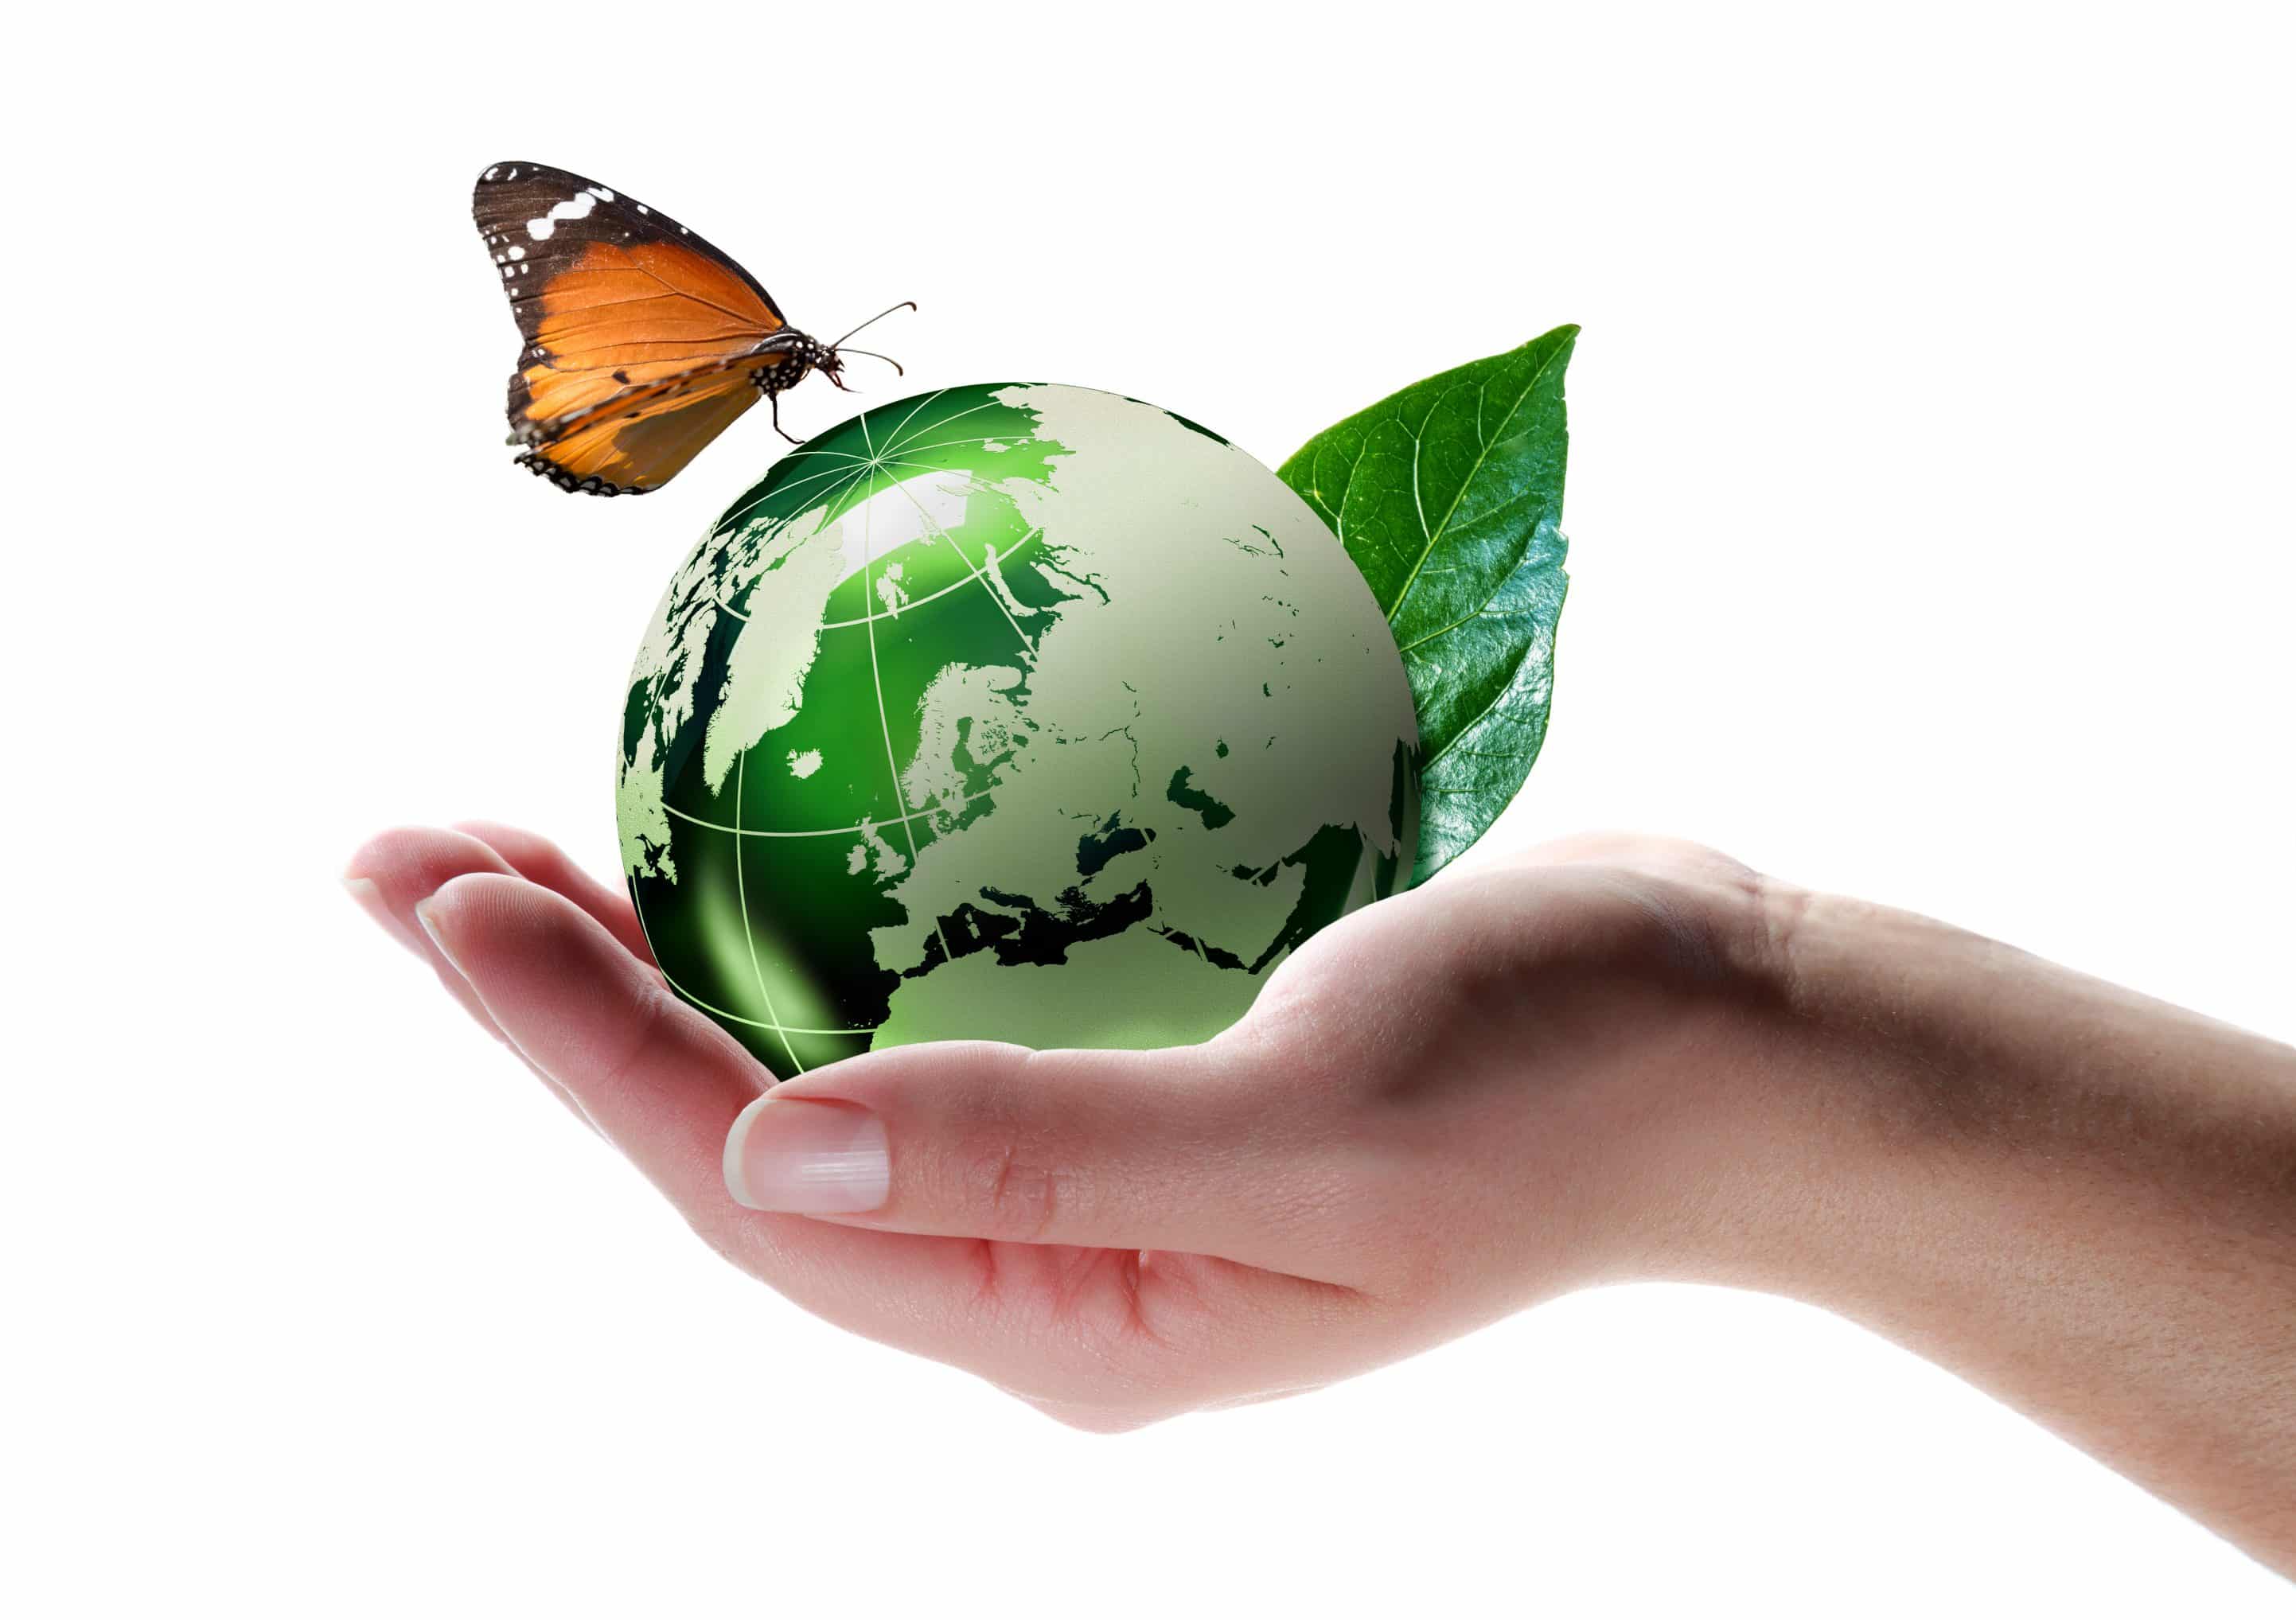 Butterfly and globe representing eco-friendly practices